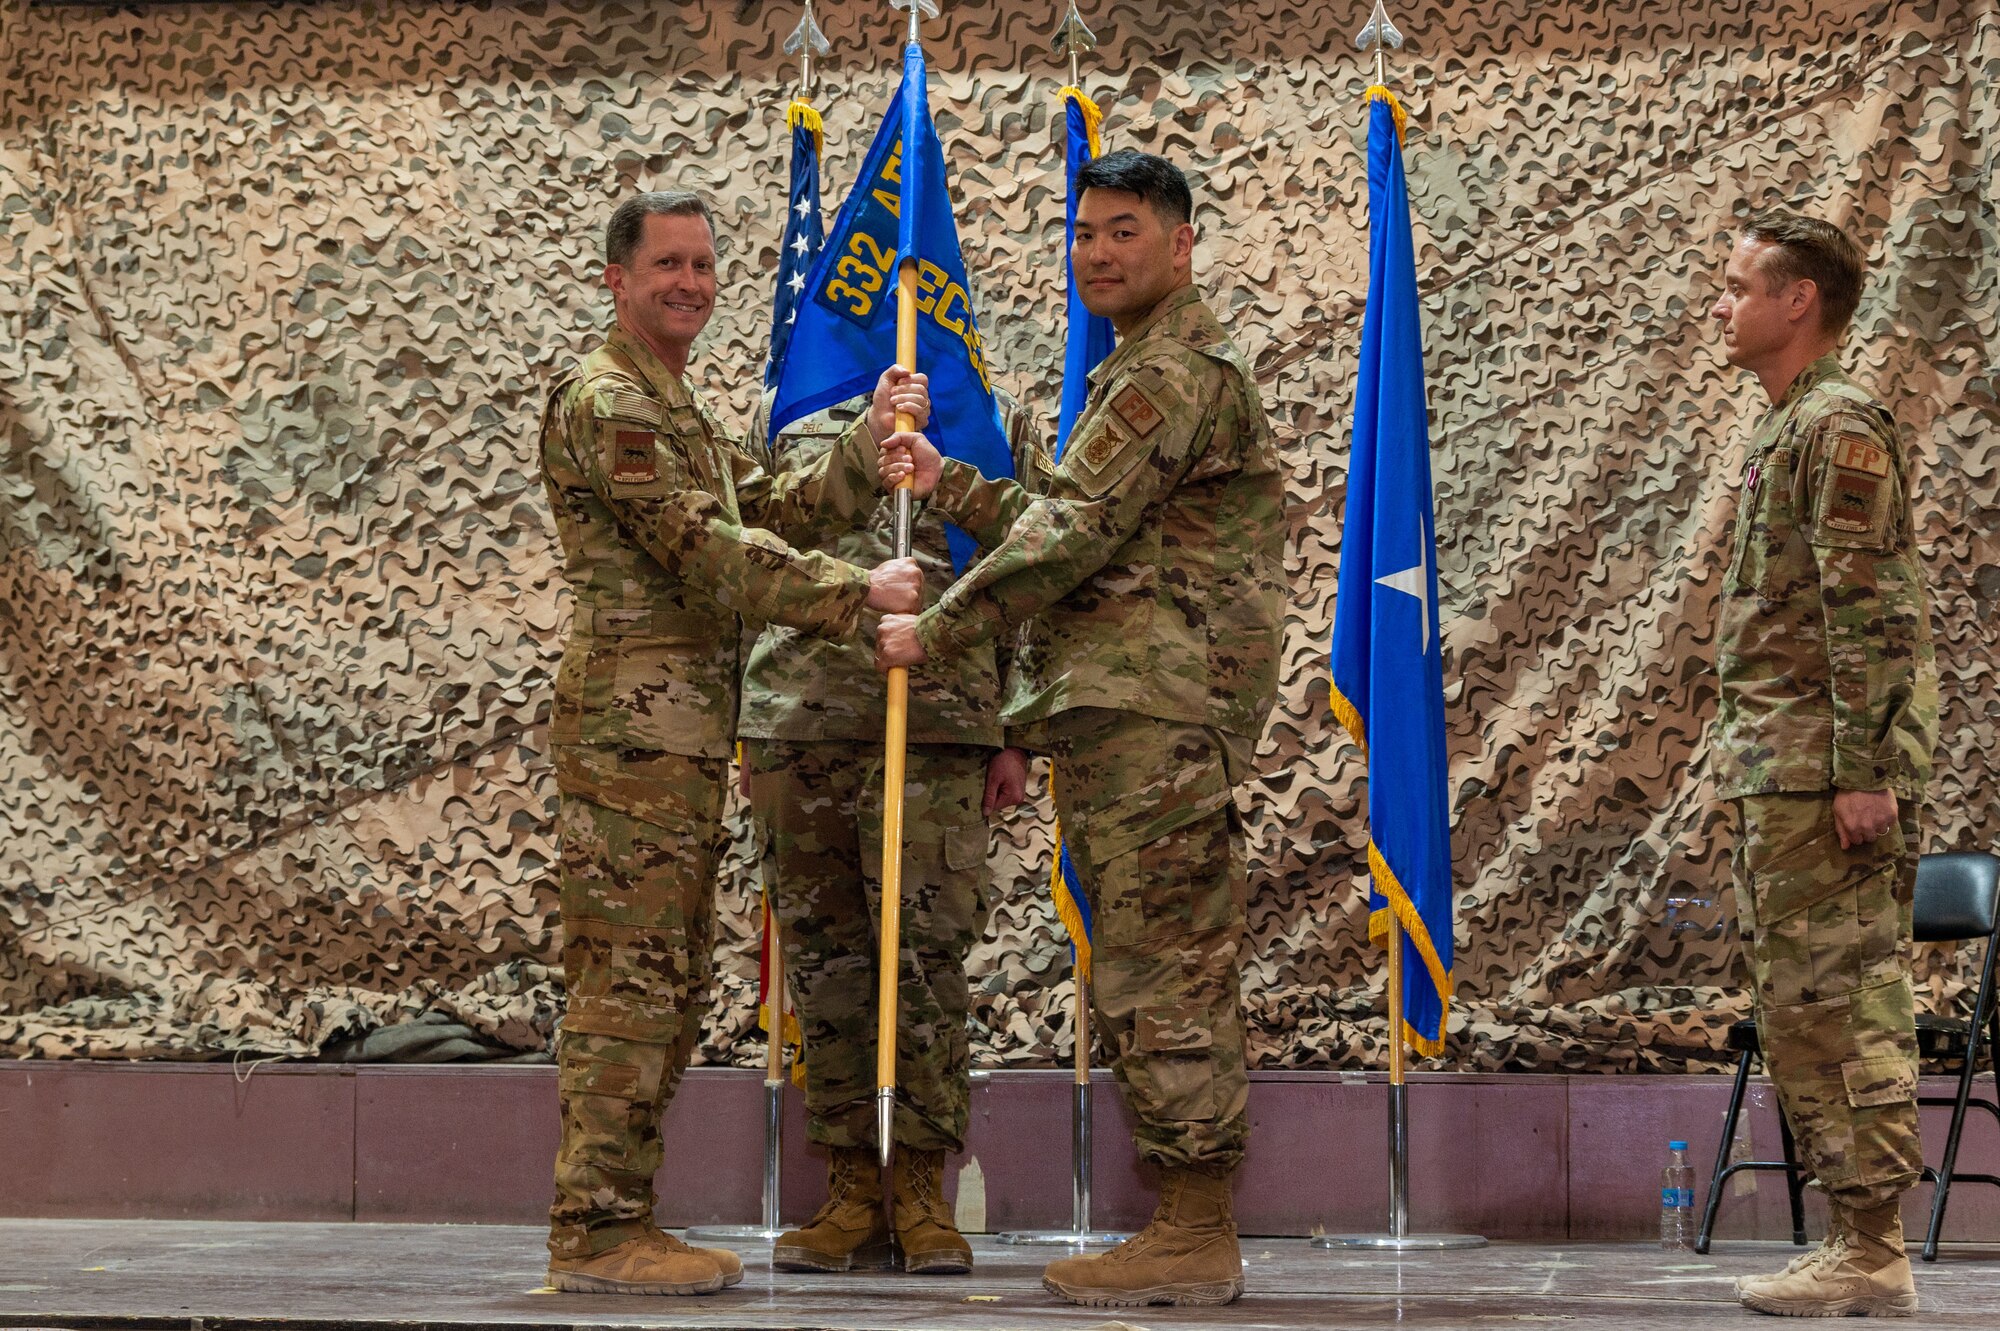 U.S. Air Force Brig. Gen. Christopher Sage, 332d Air Expeditionary Wing commander, exchanges the 332d Expeditionary Civil Engineer Squadron guidon with U.S. Air Force Lt. Col. Sean Chun, 332d ECES incoming commander, during a change of command ceremony at an undisclosed location in Southwest Asia, June 2, 2022. A change of command ceremony is a tradition that represents a formal transfer of authority and responsibility from the outgoing commander to the incoming commander. The 332d ECES provides, operates, and maintains a sustainable installation through engineering and emergency response services across the full mission spectrum. (U.S. Air Force photo by Tech. Sgt. Lauren M. Snyder)